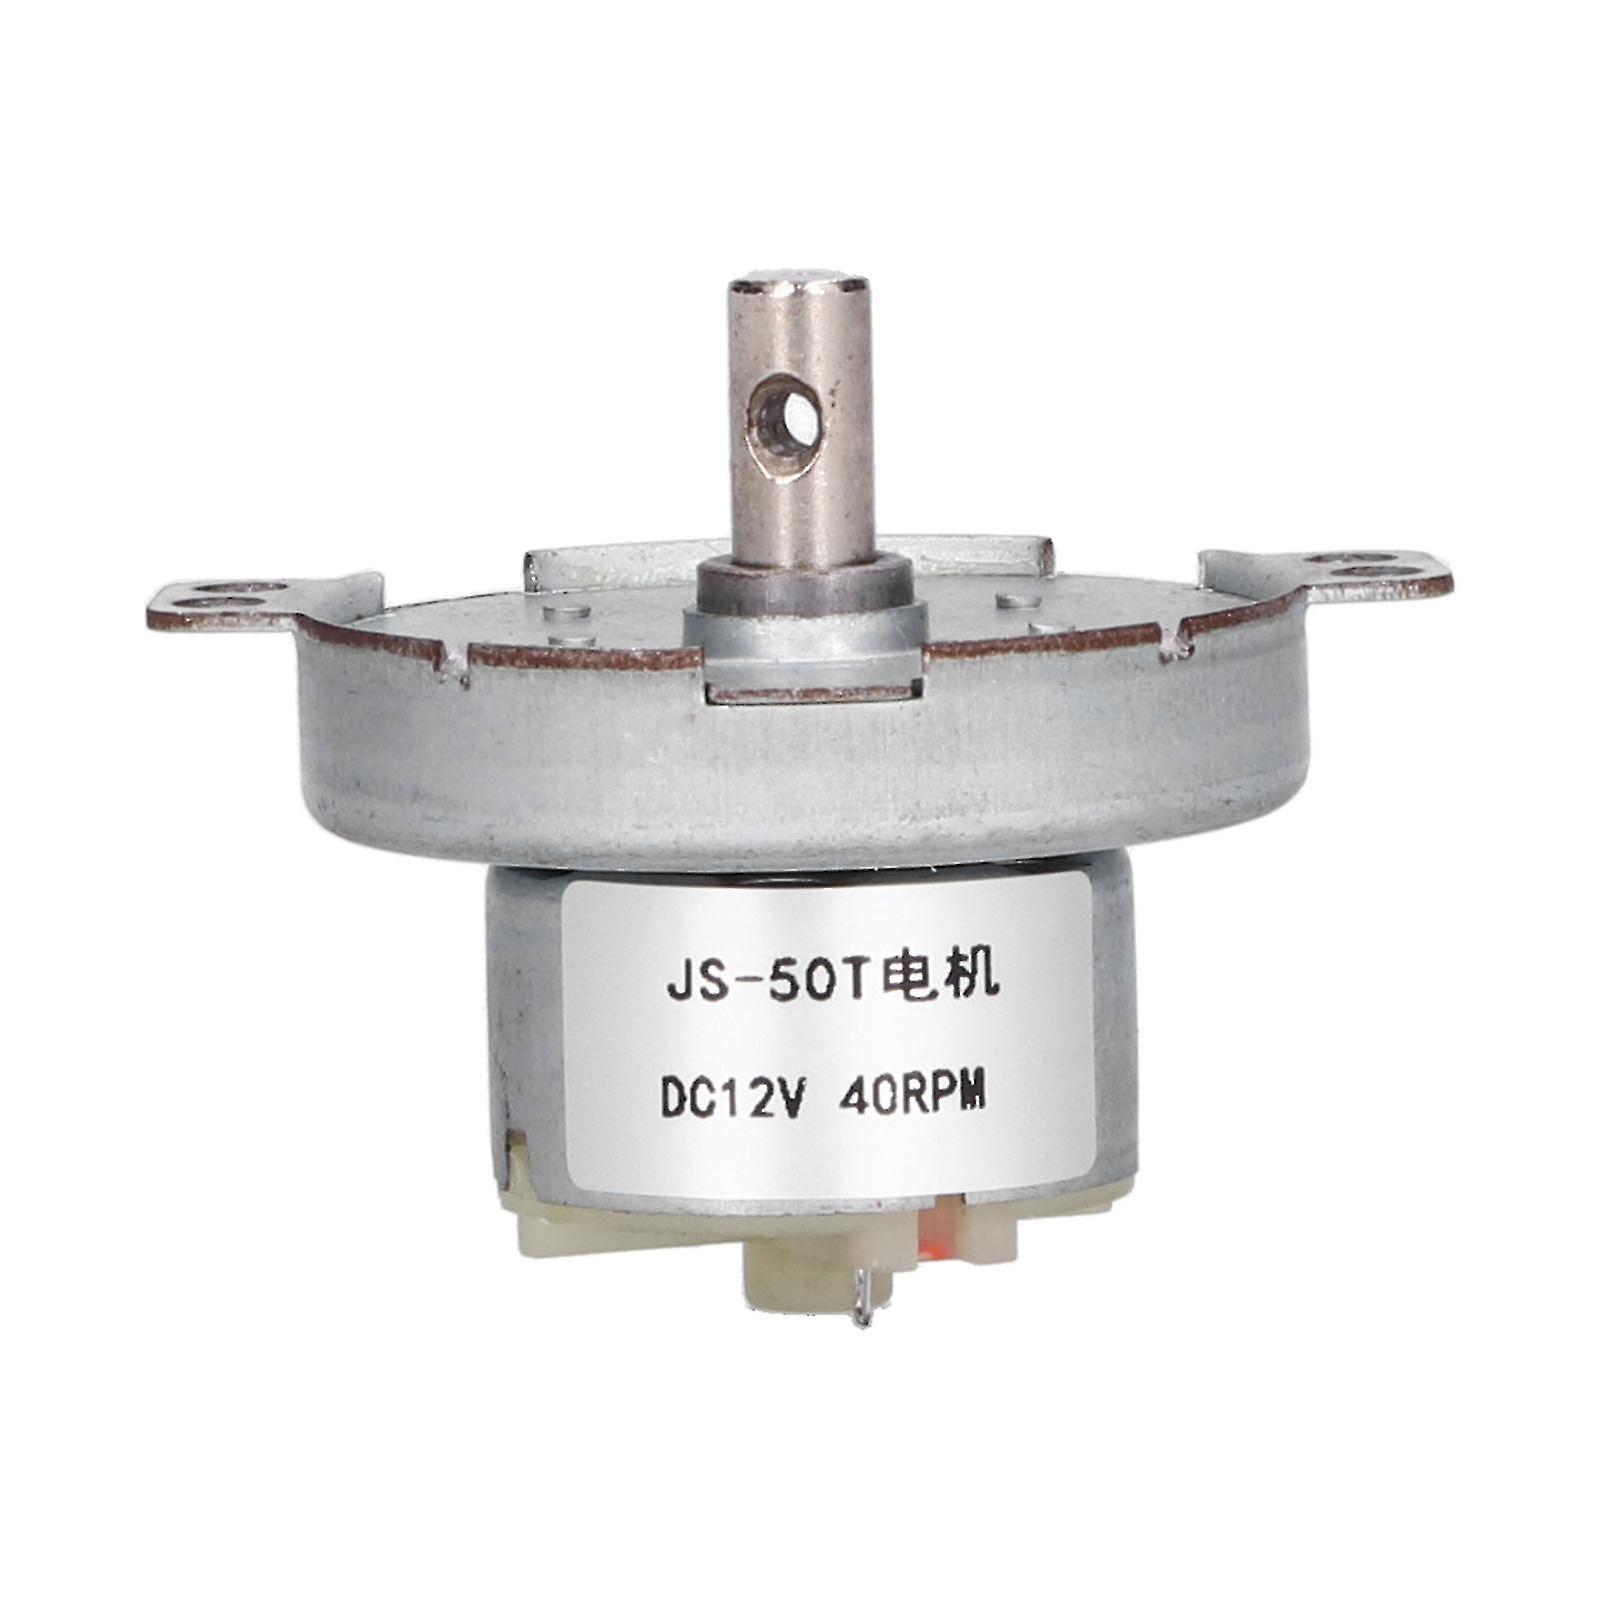 Gear Motor Reduction Geared Box Equipment Industrial Control Supplies 40RPM DC12V JS‑50T